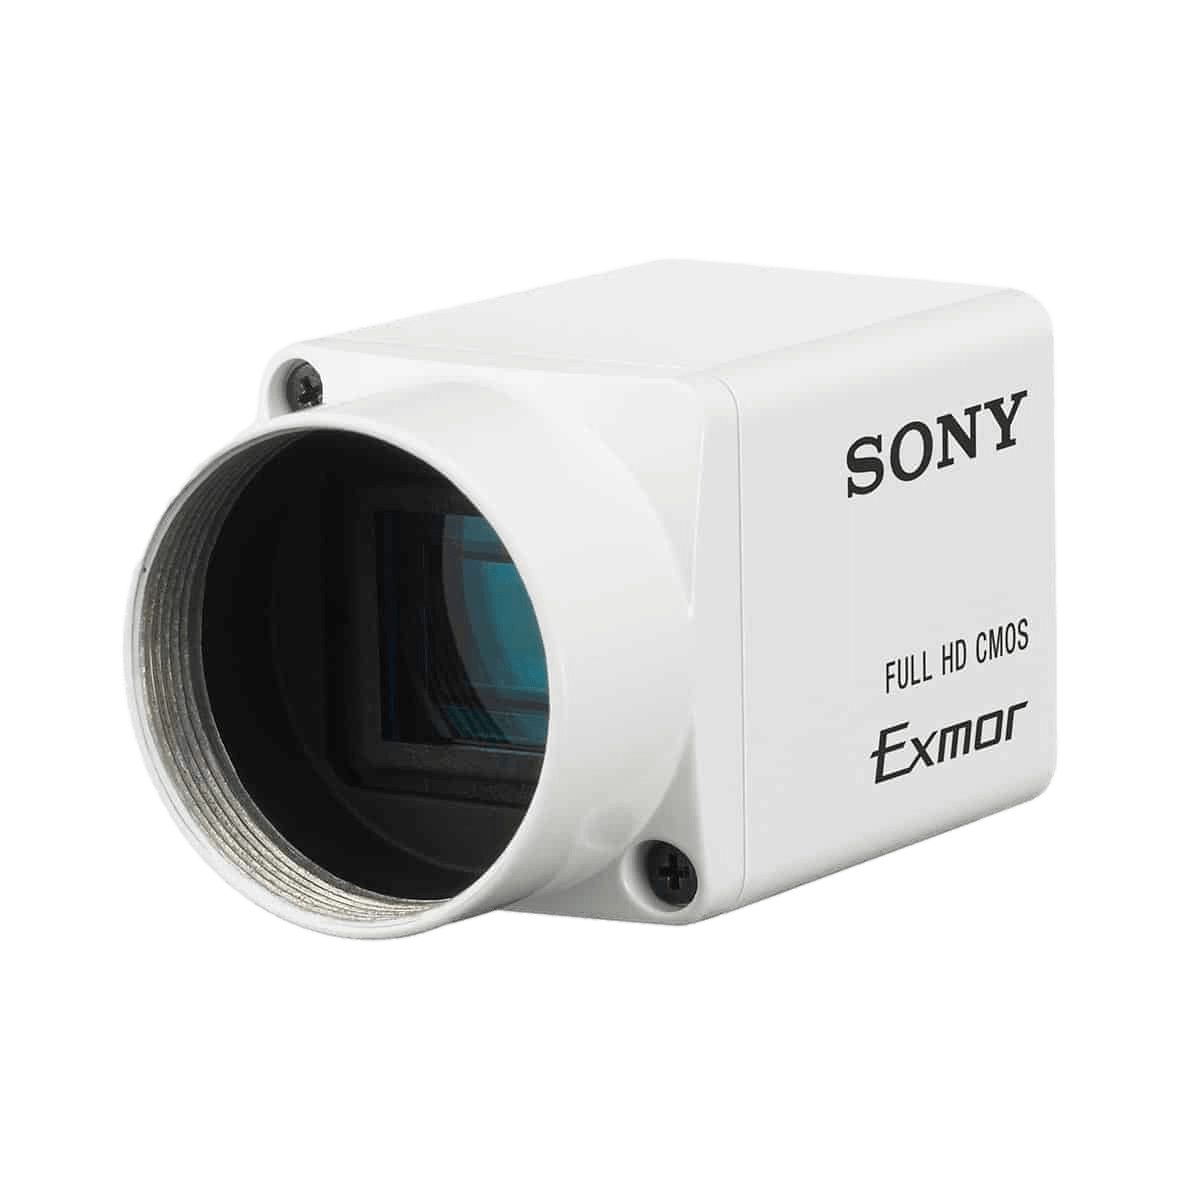 Capture Full HD video images with the Sony MCC-500MD Full HD Surgical Video Camera